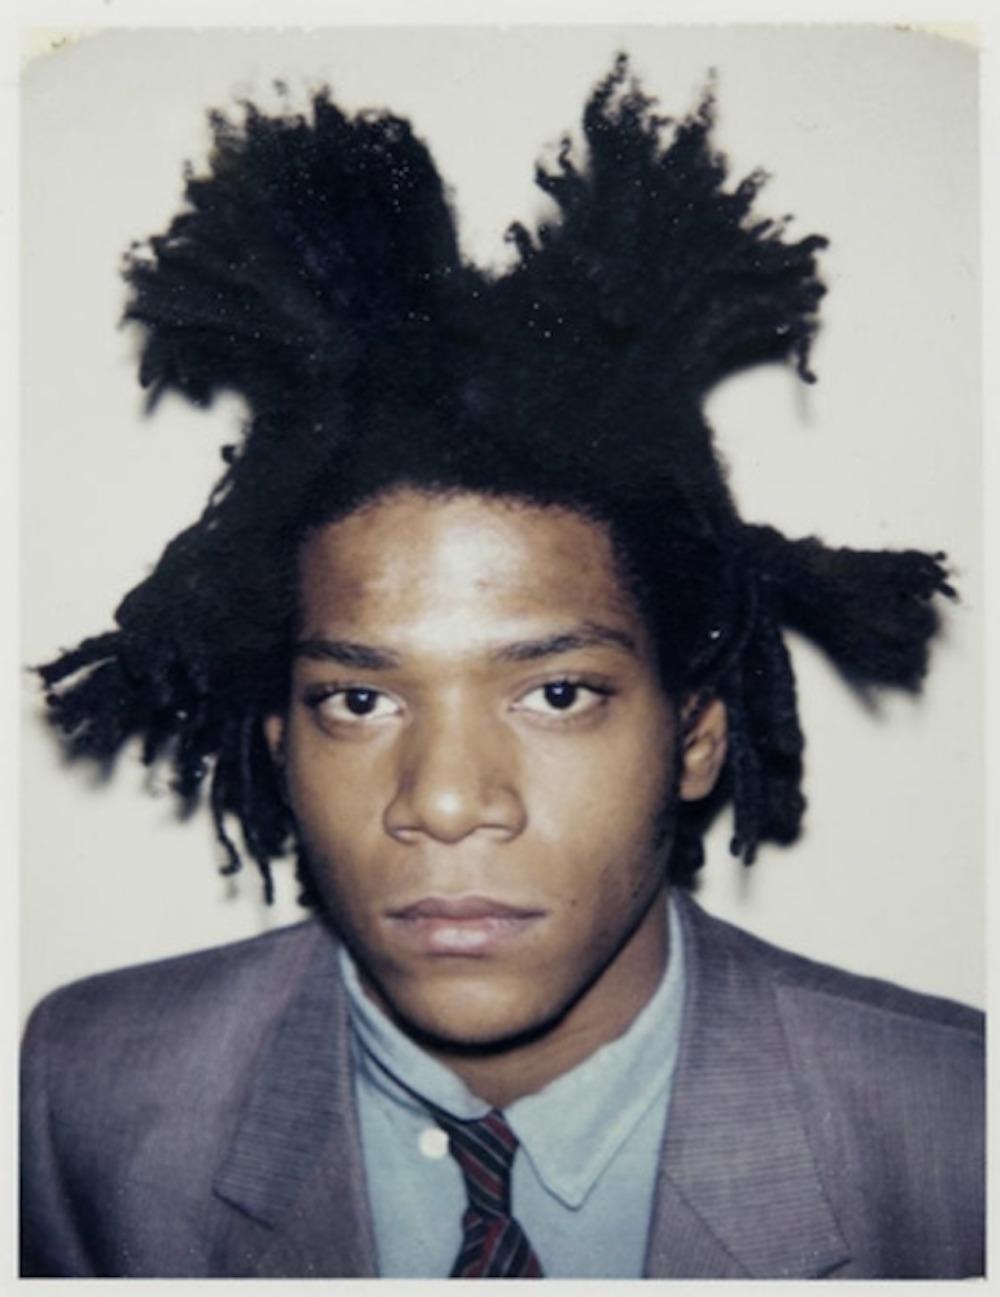 Andy Warhol & Jean Michel Basquiat Print - The Andy Warhol Foundation, Portrait Of Jean-Michel Basquiat in 1982